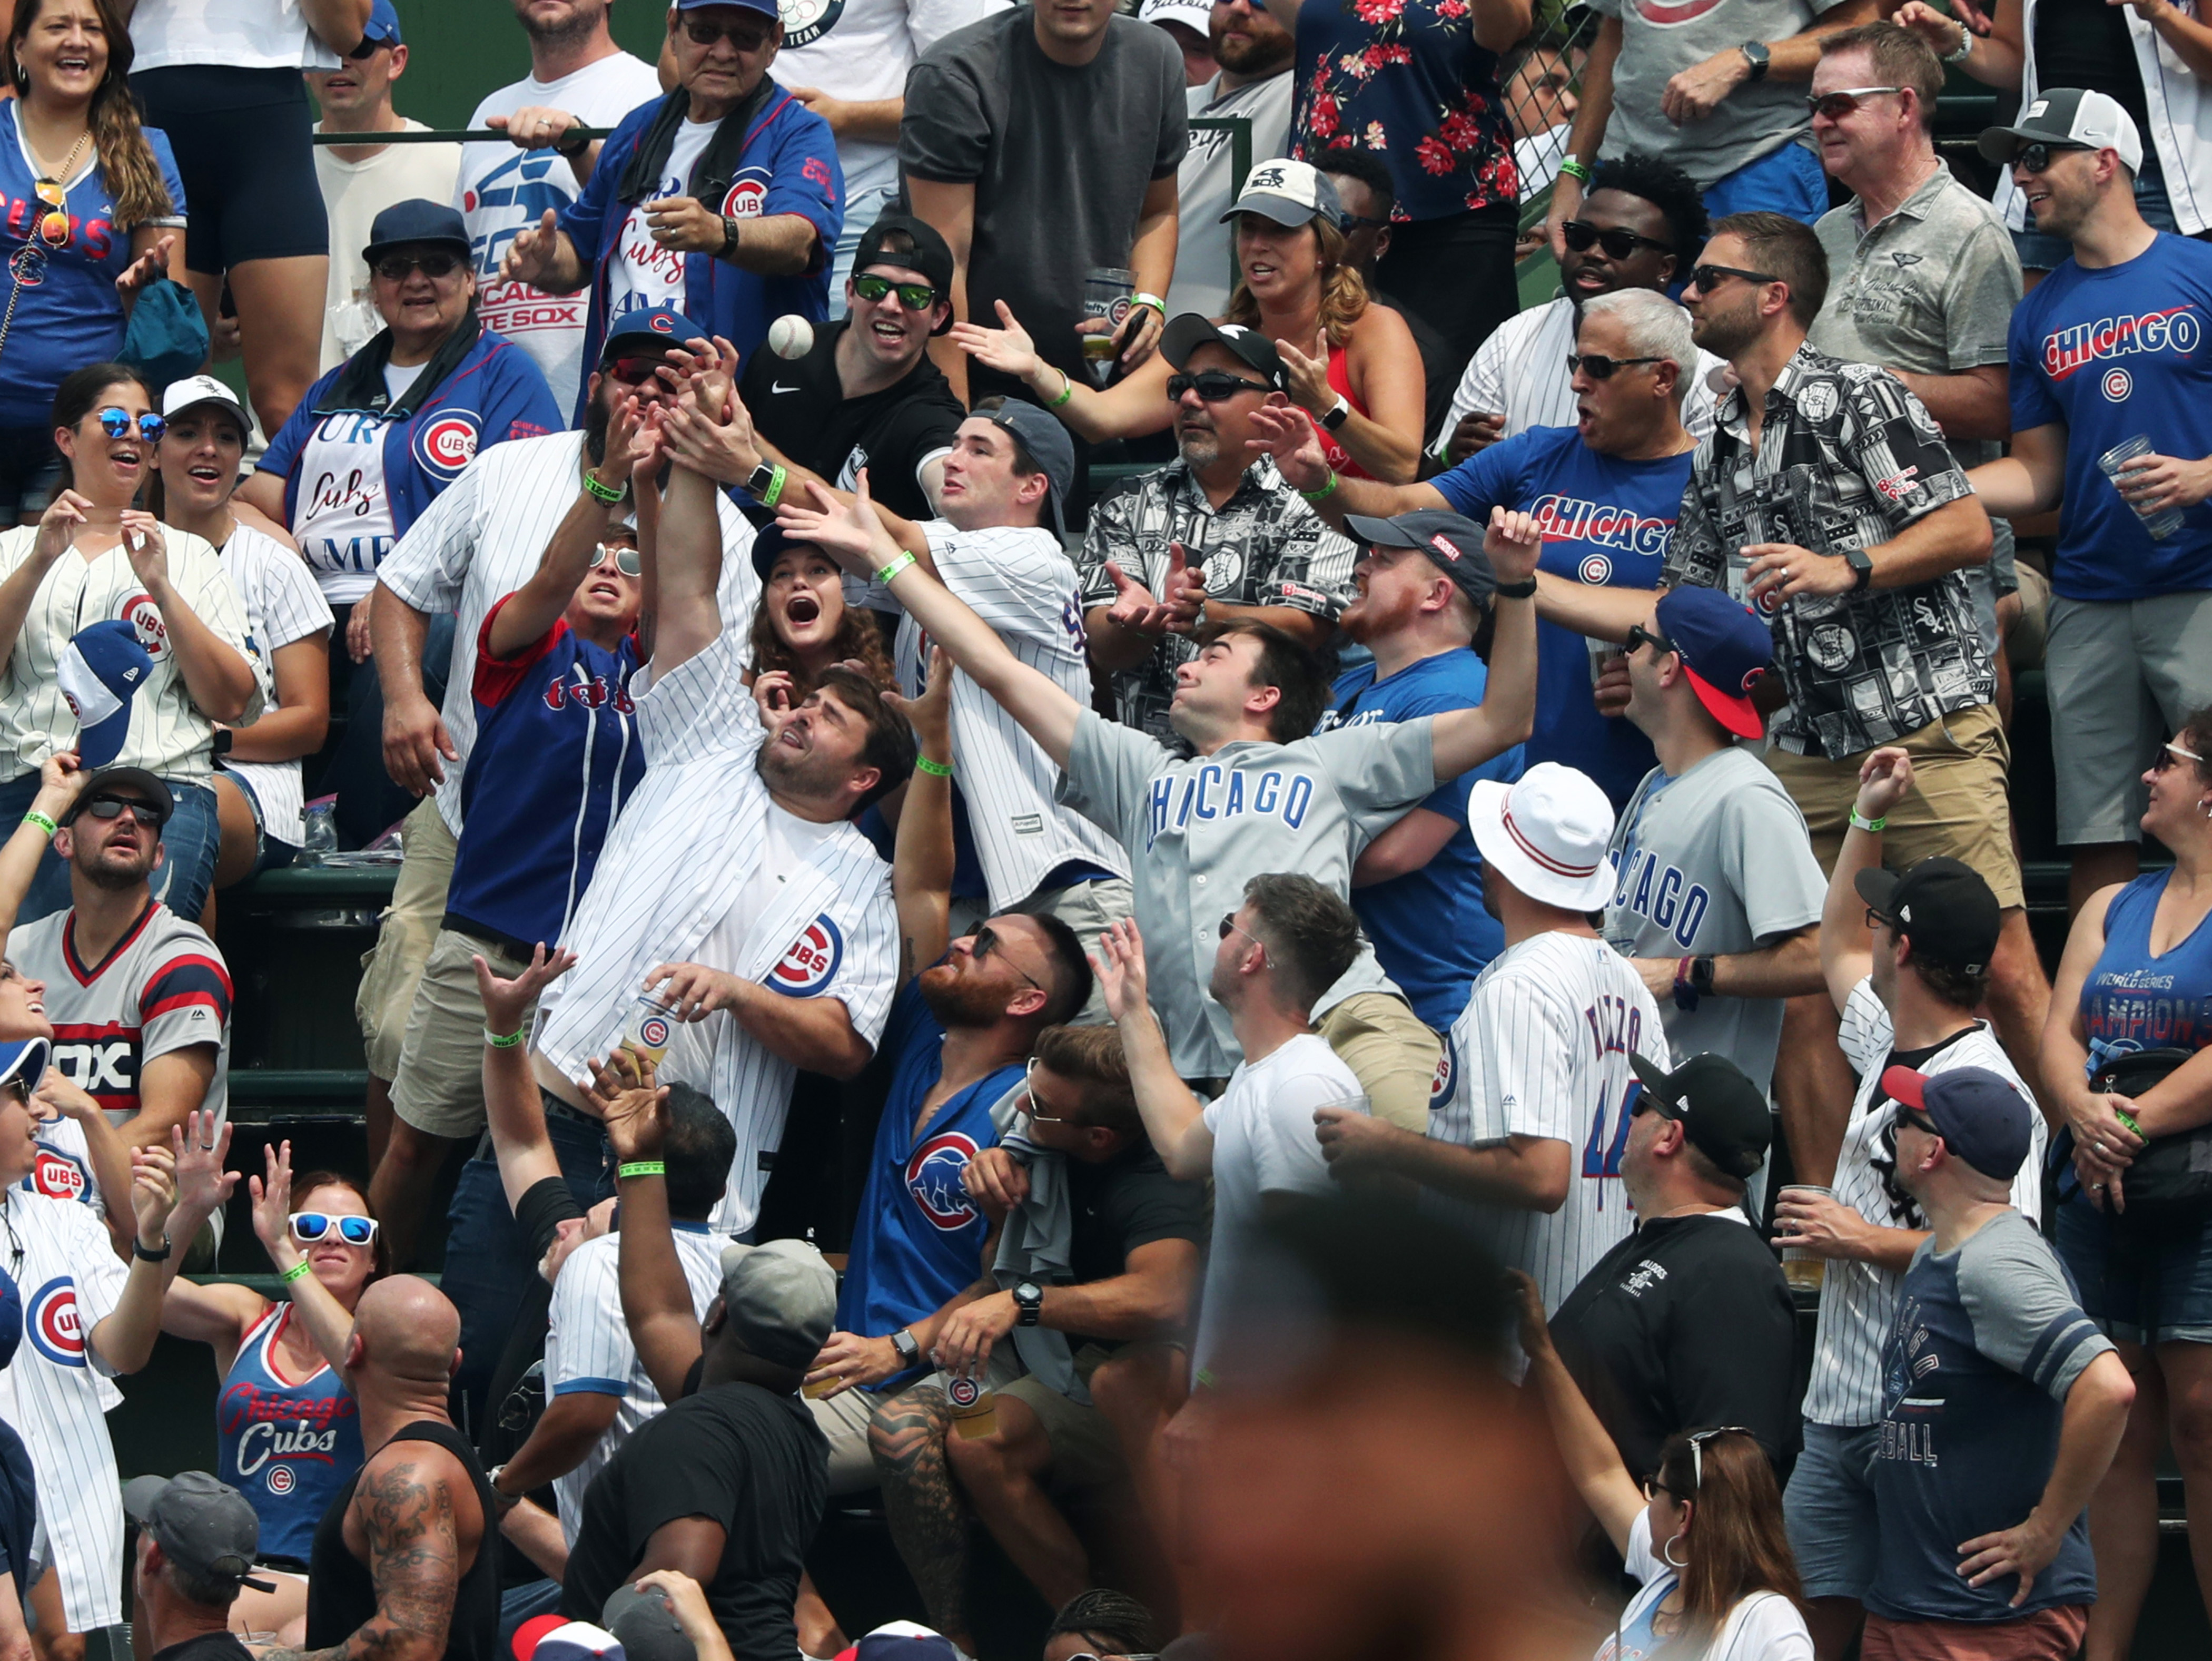 White Sox, Cubs fans eager for new season of baseball – U-High Midway